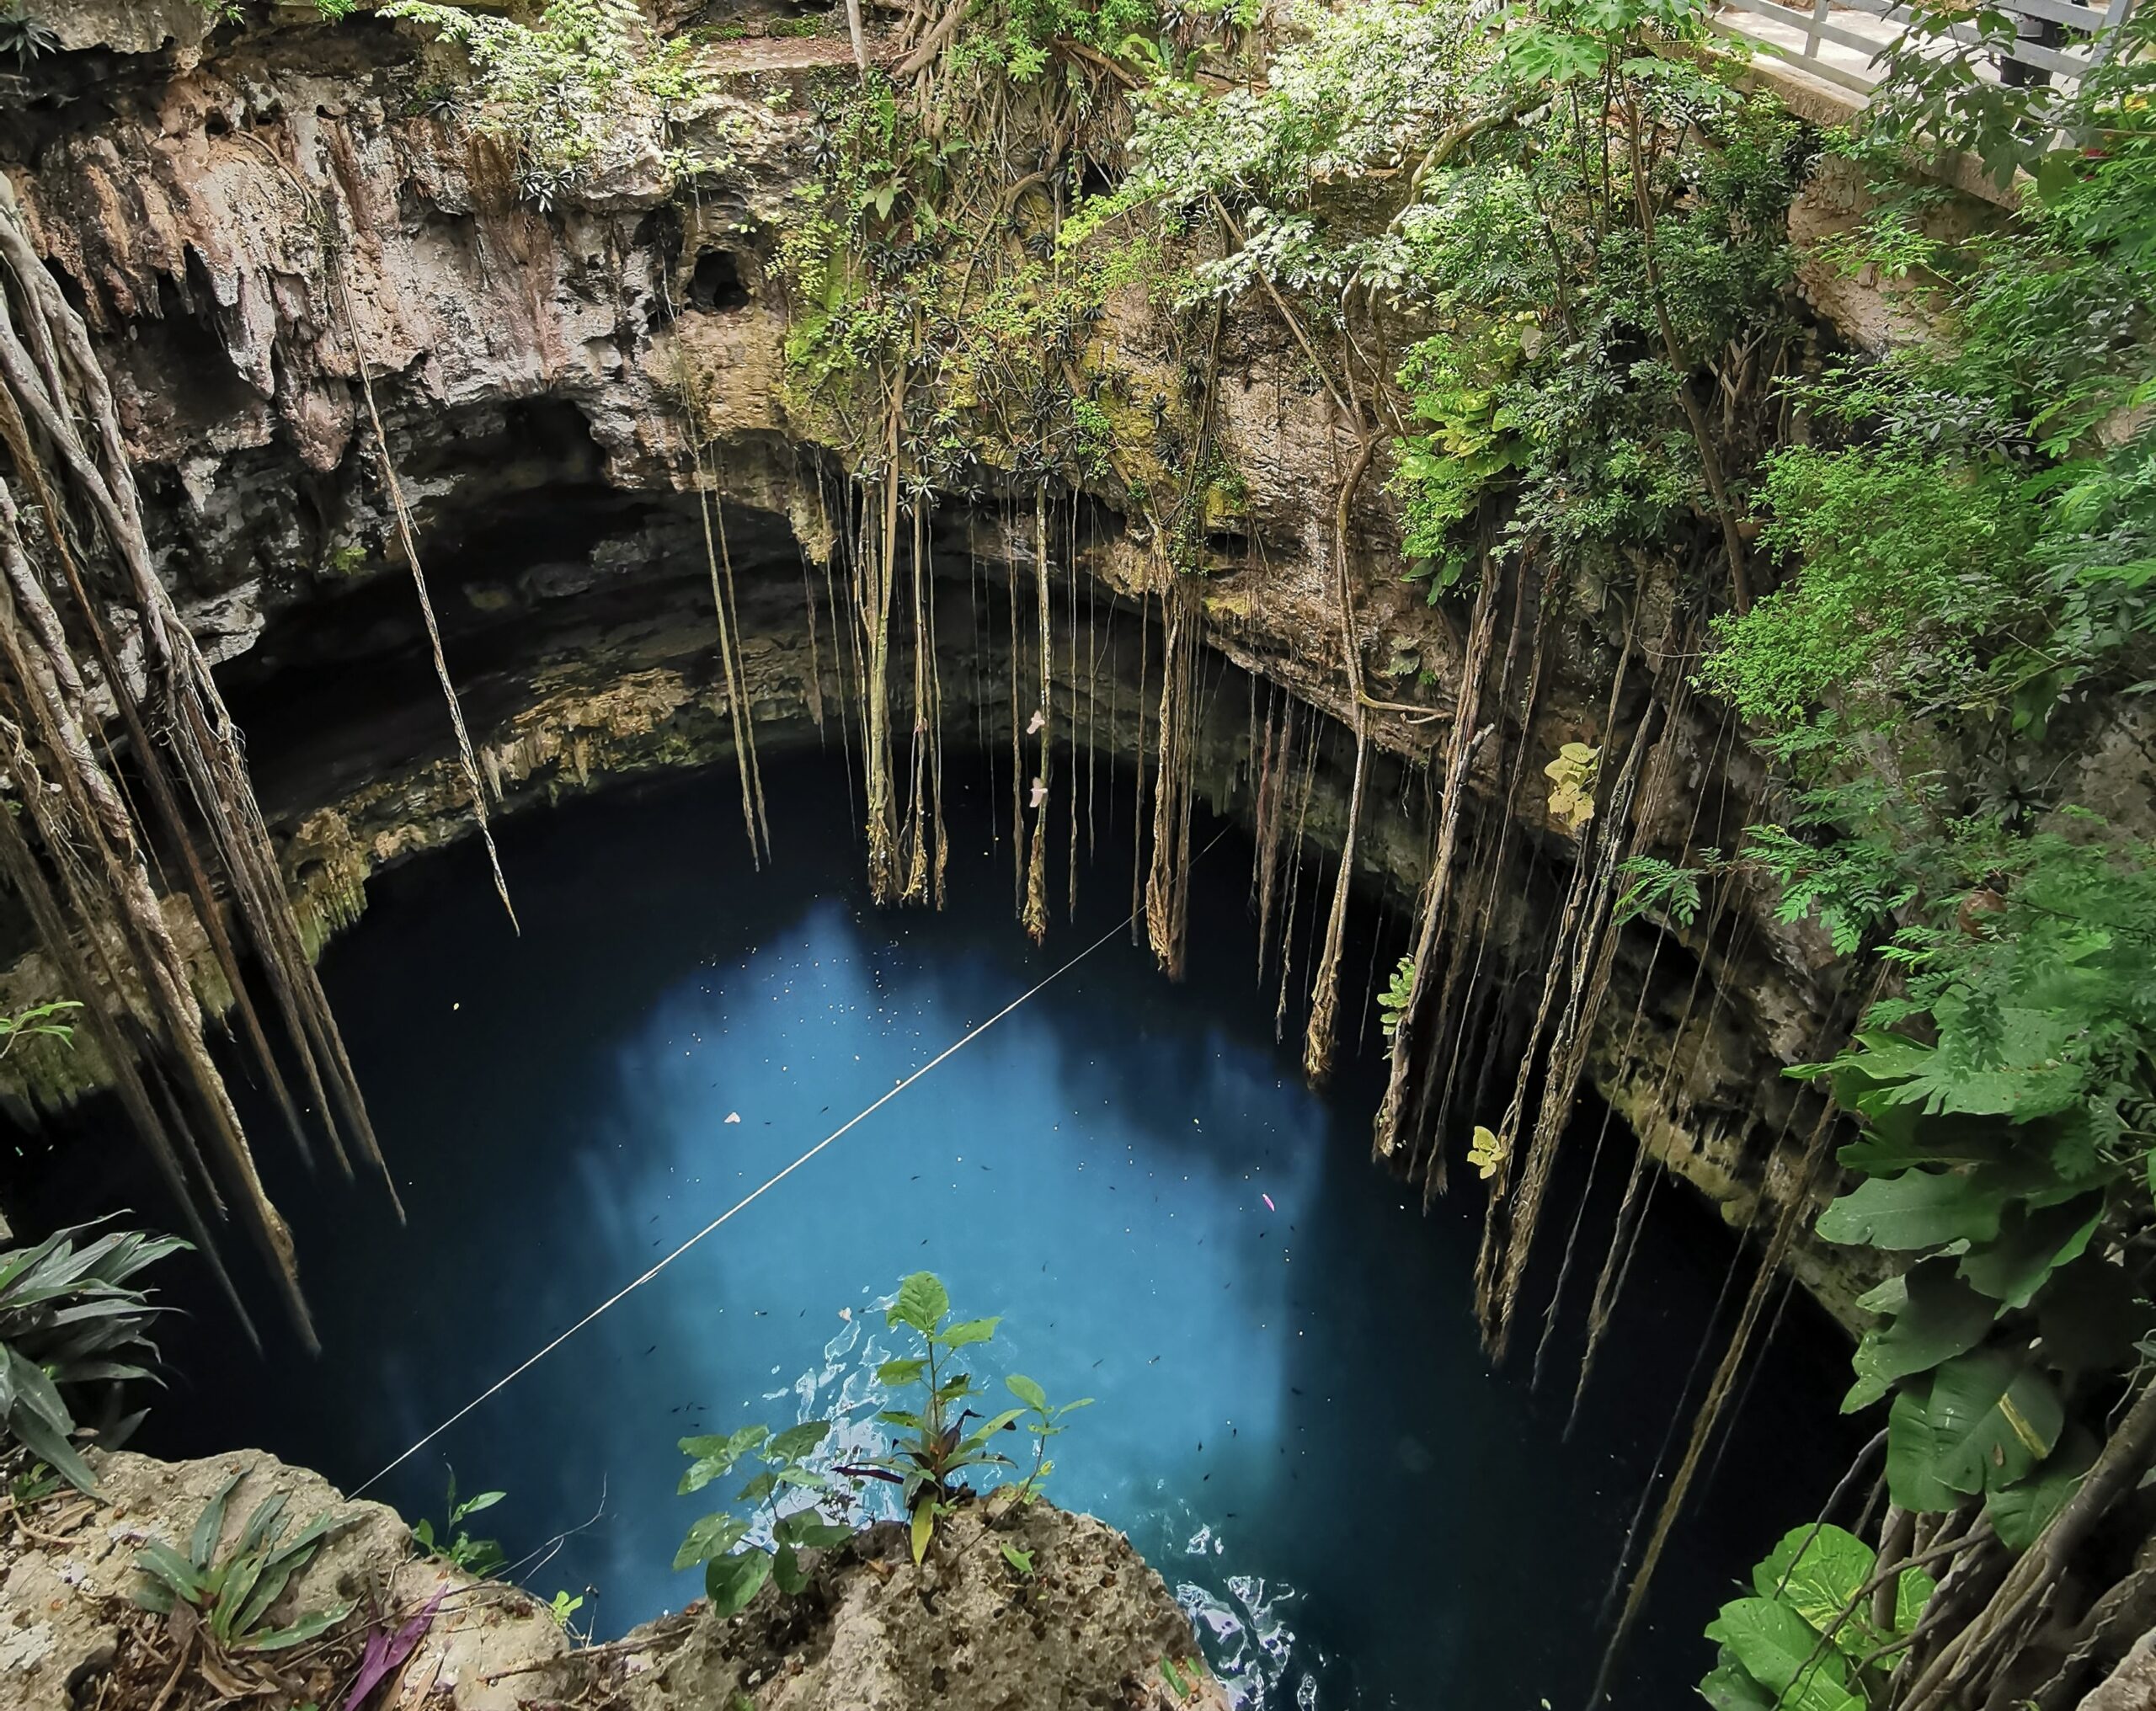 The safe city of Merida is a serene location for vacationers that desire a Mexico trip.
Pictured: a waterfall leading into a cenote in Merida, Mexico 